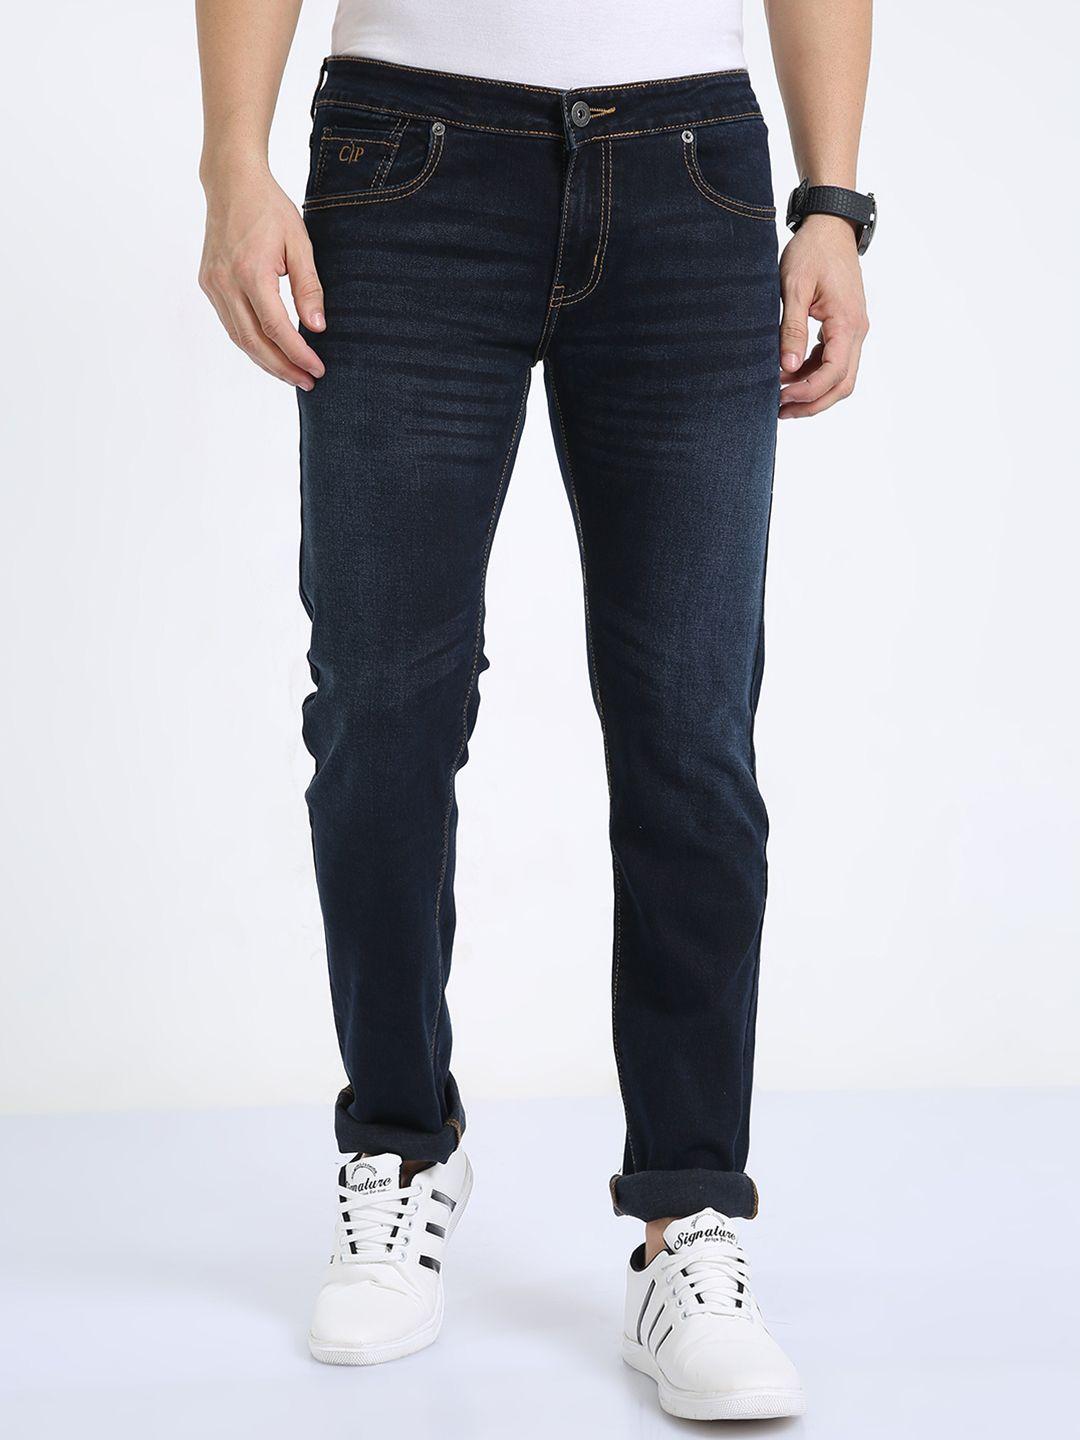 classic-polo-men-jean-slim-fit-clean-look-light-fade-stretchable--jeans